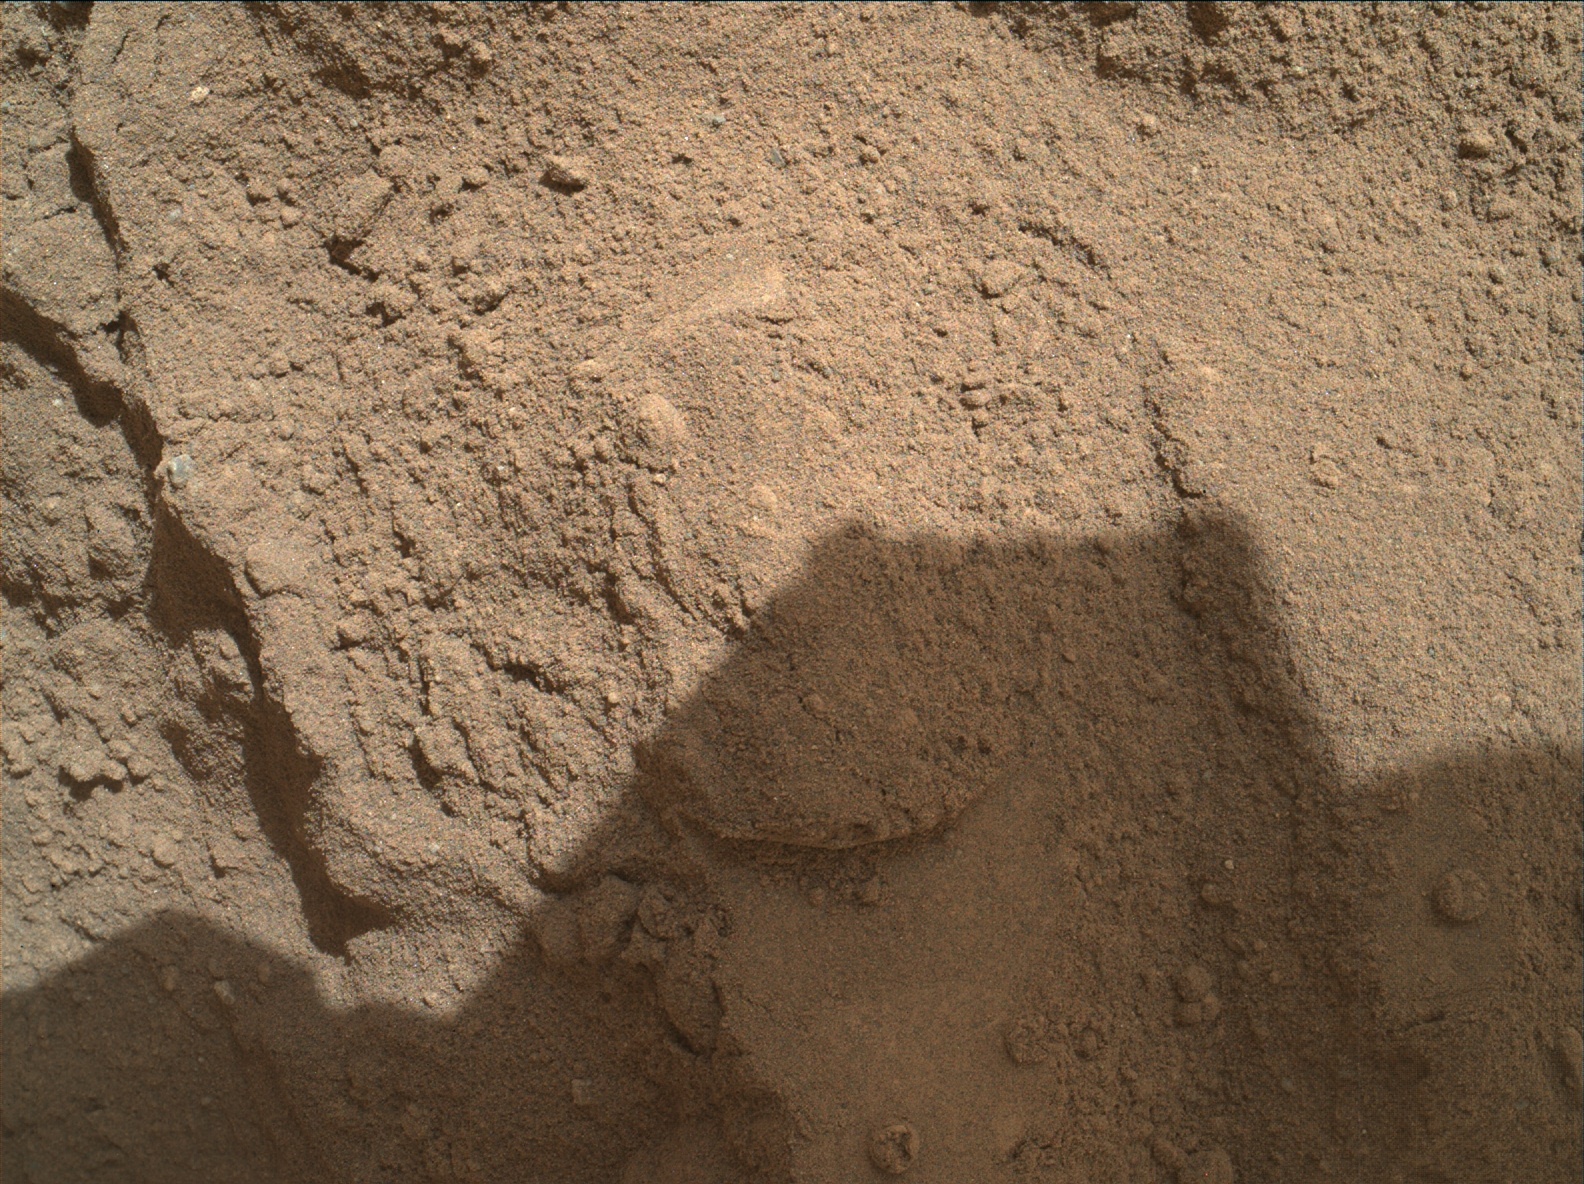 Nasa's Mars rover Curiosity acquired this image using its Mars Hand Lens Imager (MAHLI) on Sol 674